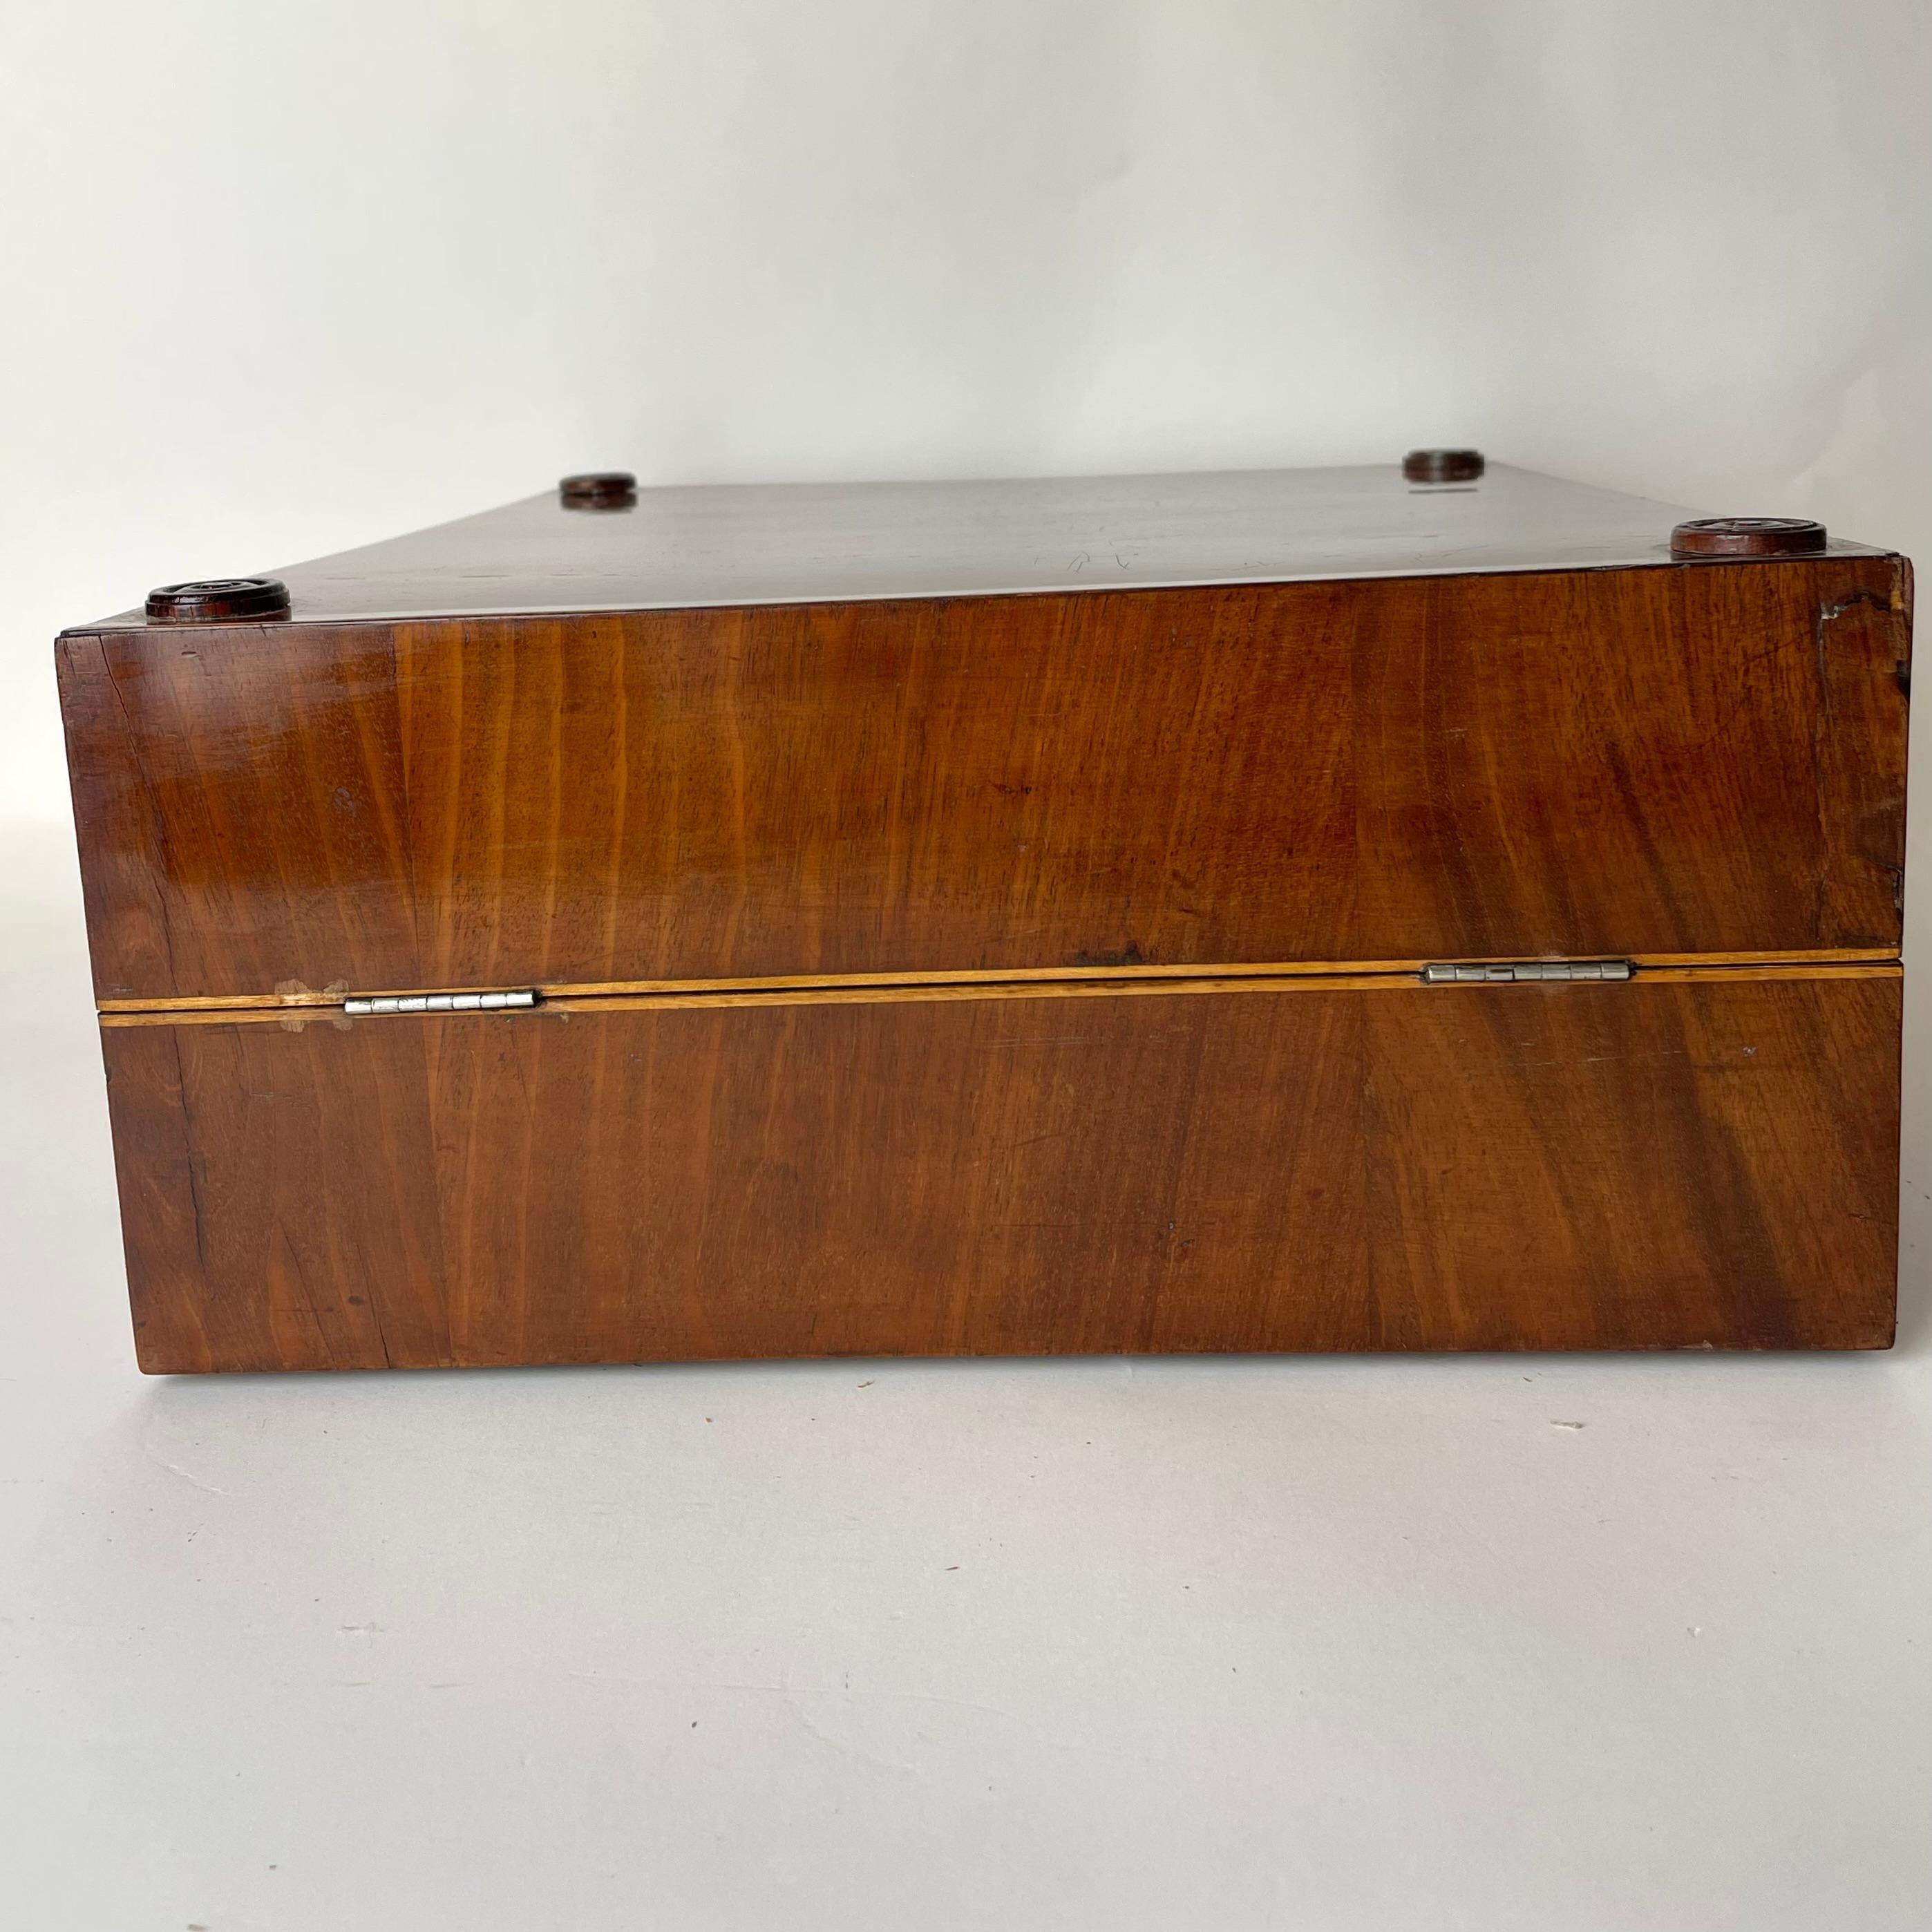 Silver Empire Backgammon Games Box in Mahogany with Pieces, early 19th Century For Sale